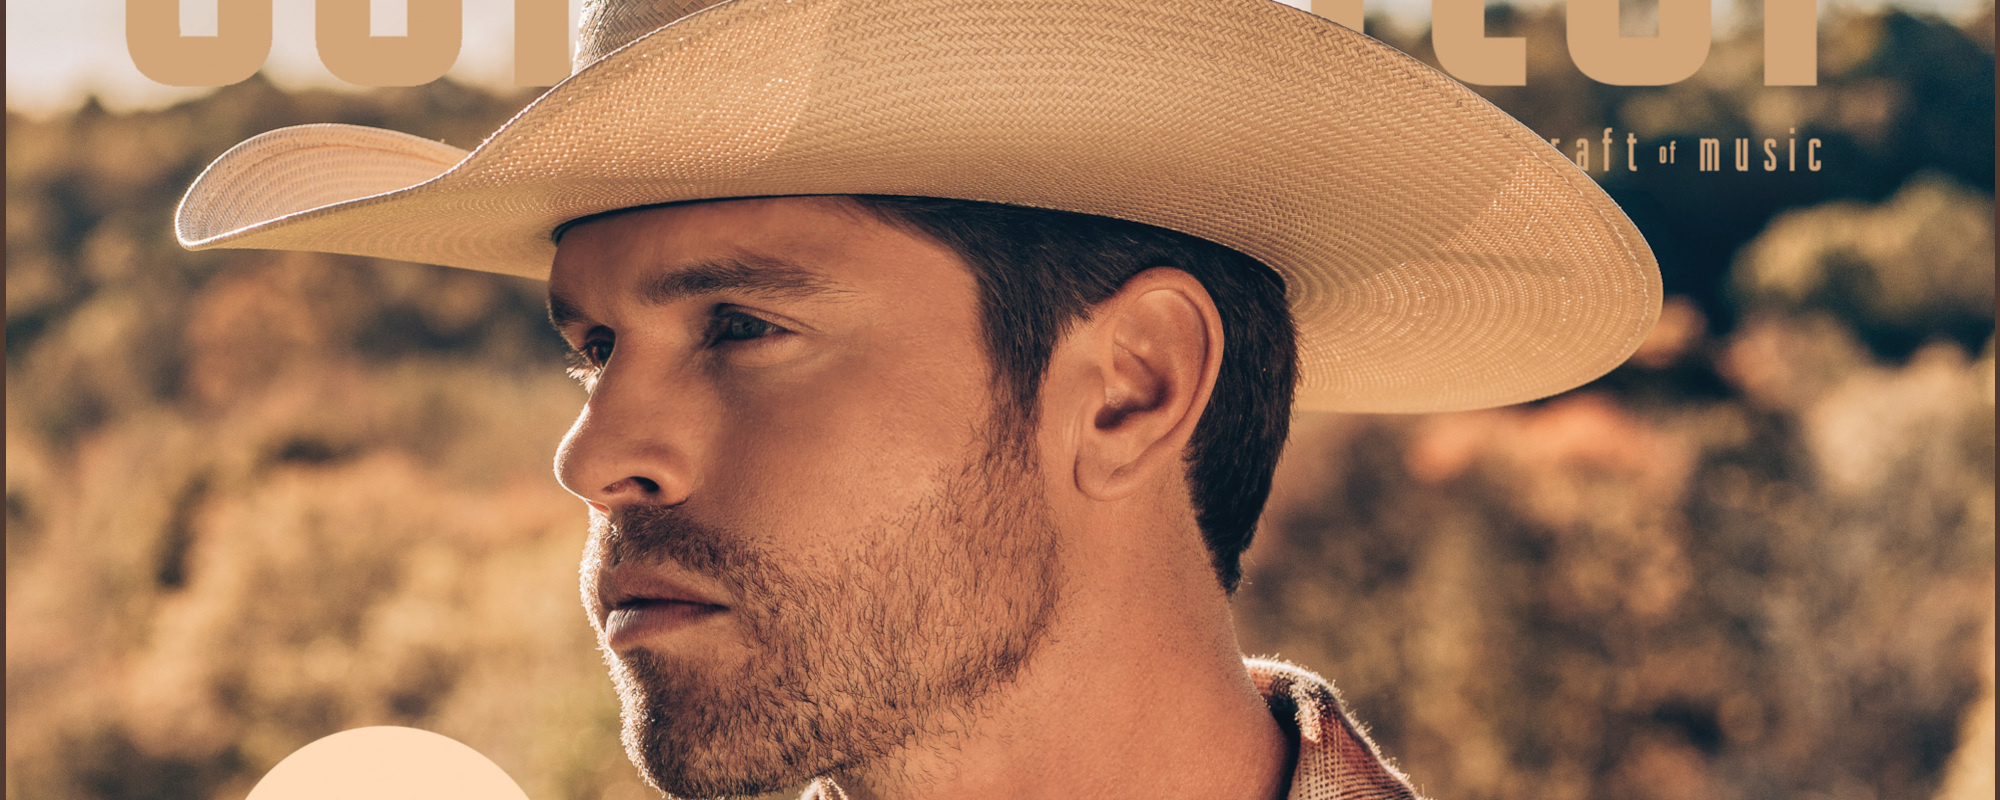 Dustin Lynch Reaches for All the Stars on Fifth Album ‘Blue In The Sky’